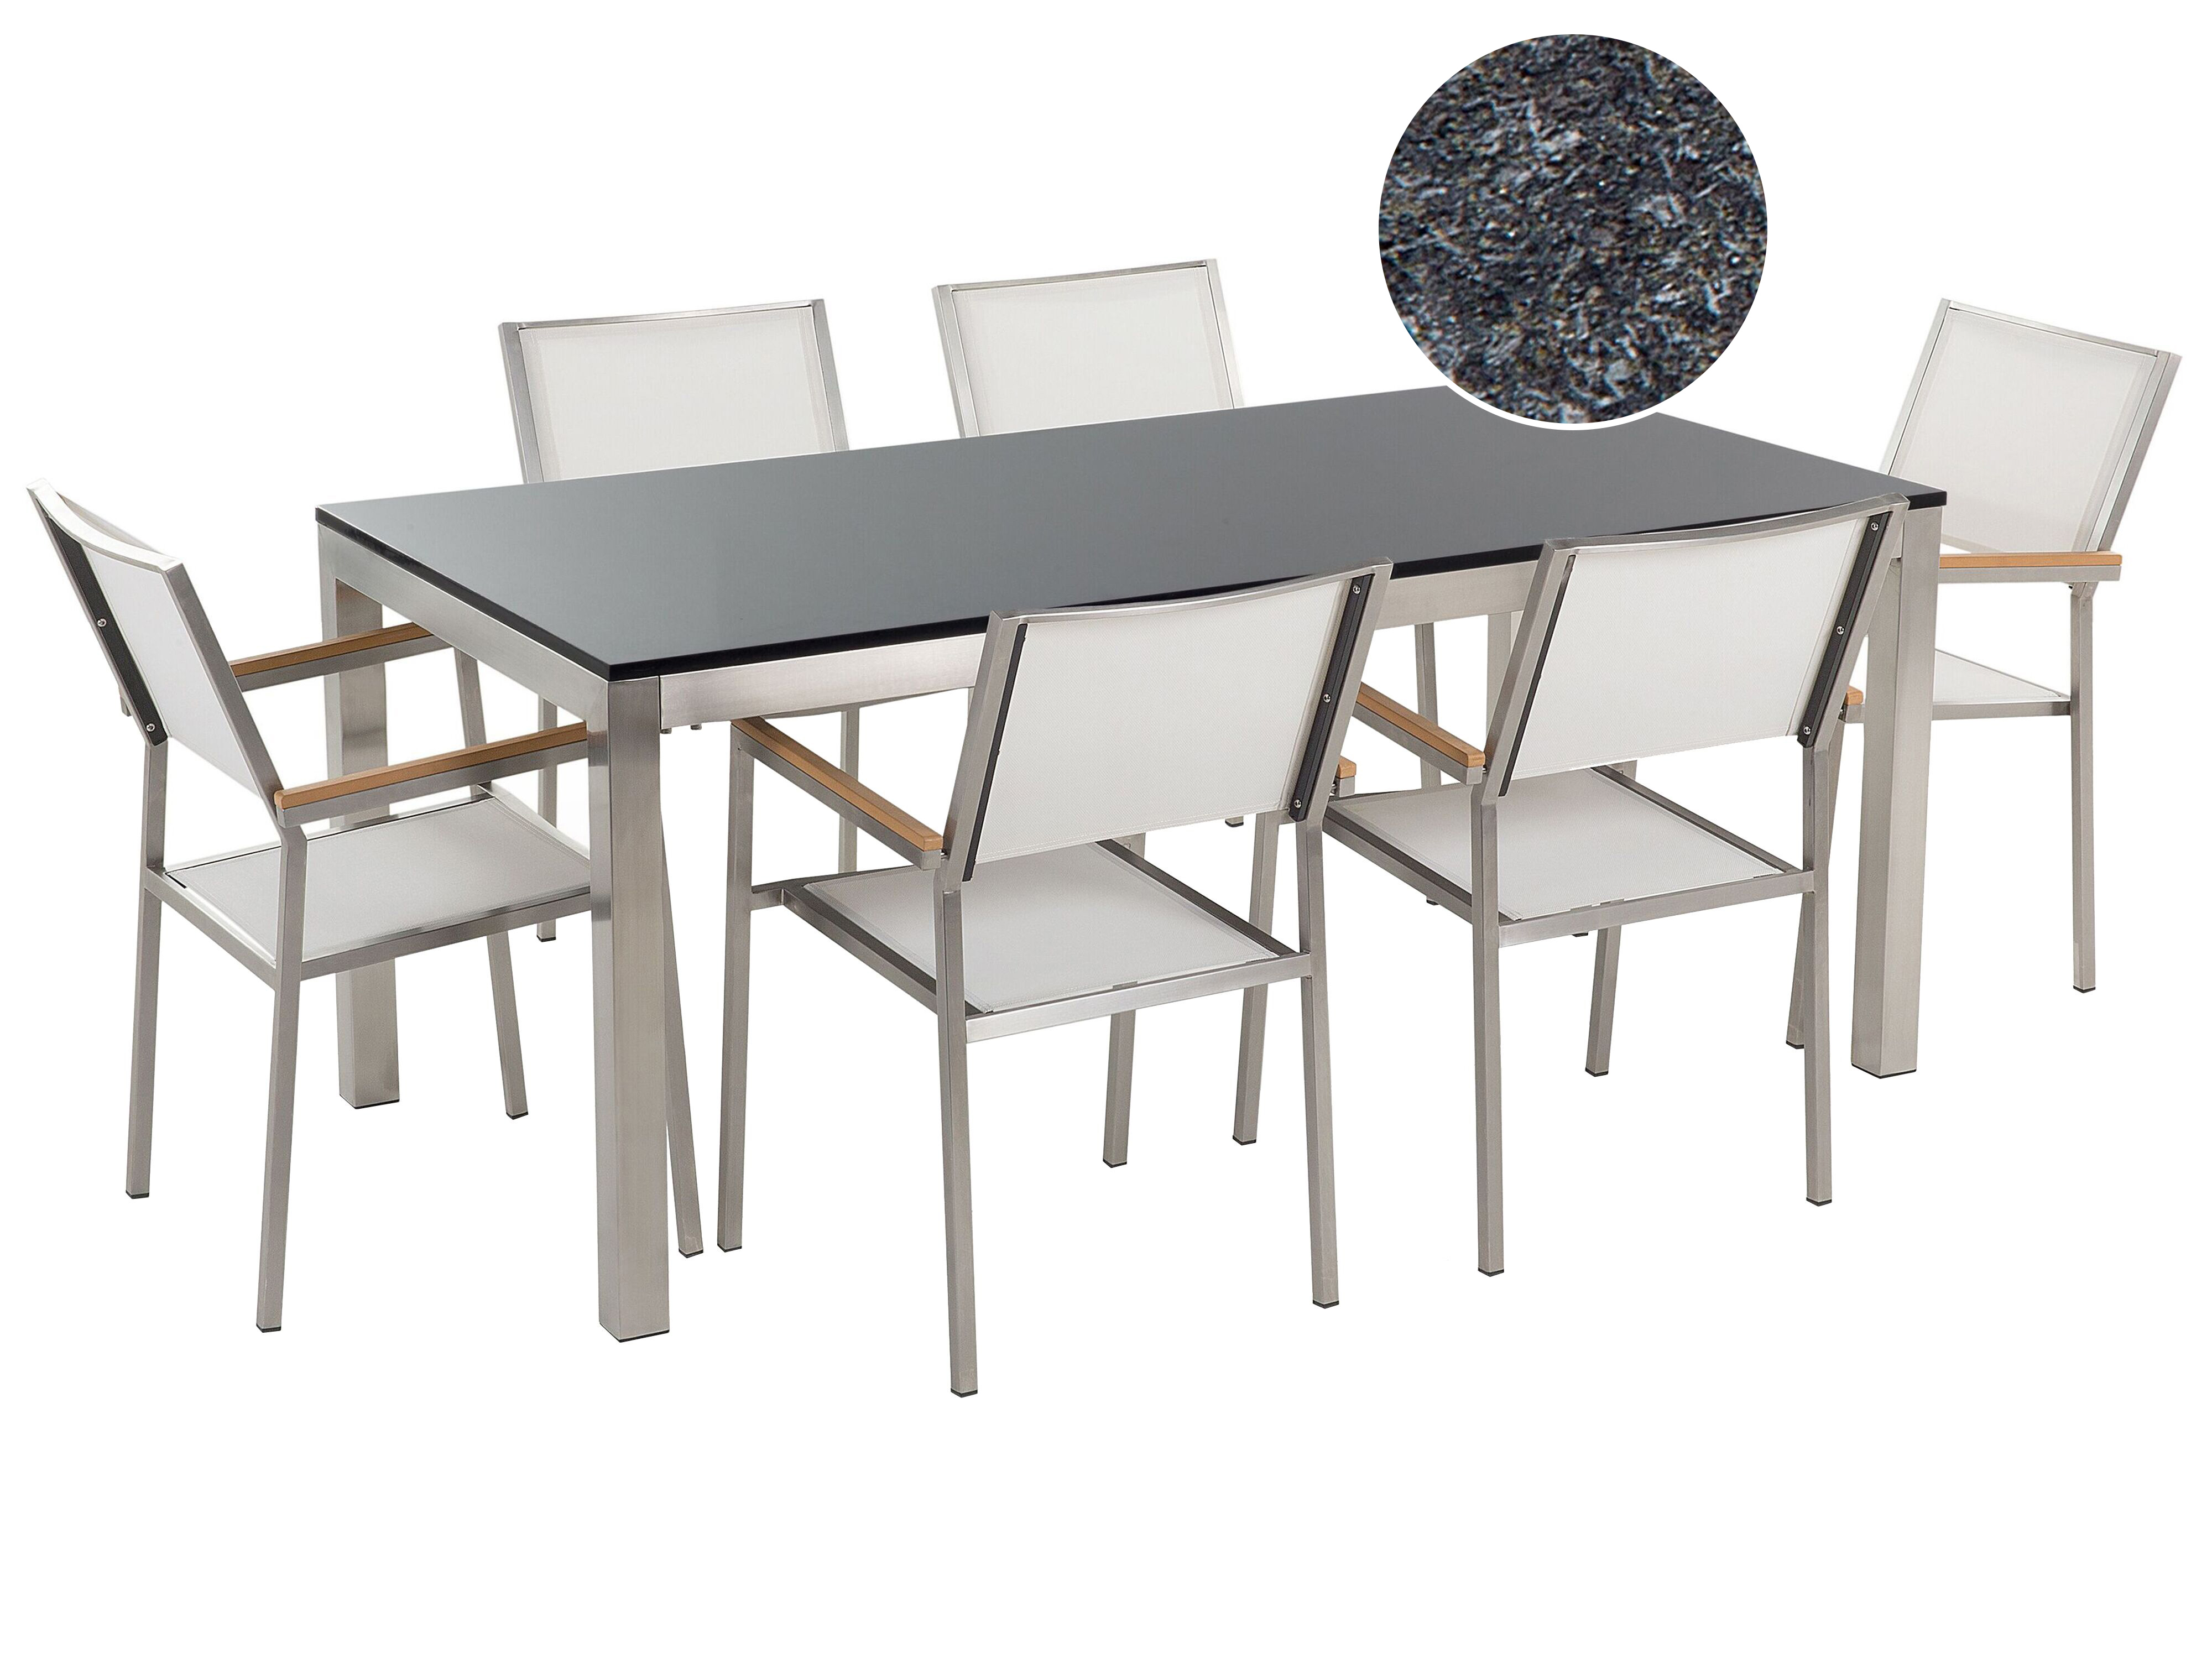 6 Seater Garden Dining Set Flamed Granite Top with White Chairs GROSSETO_433109